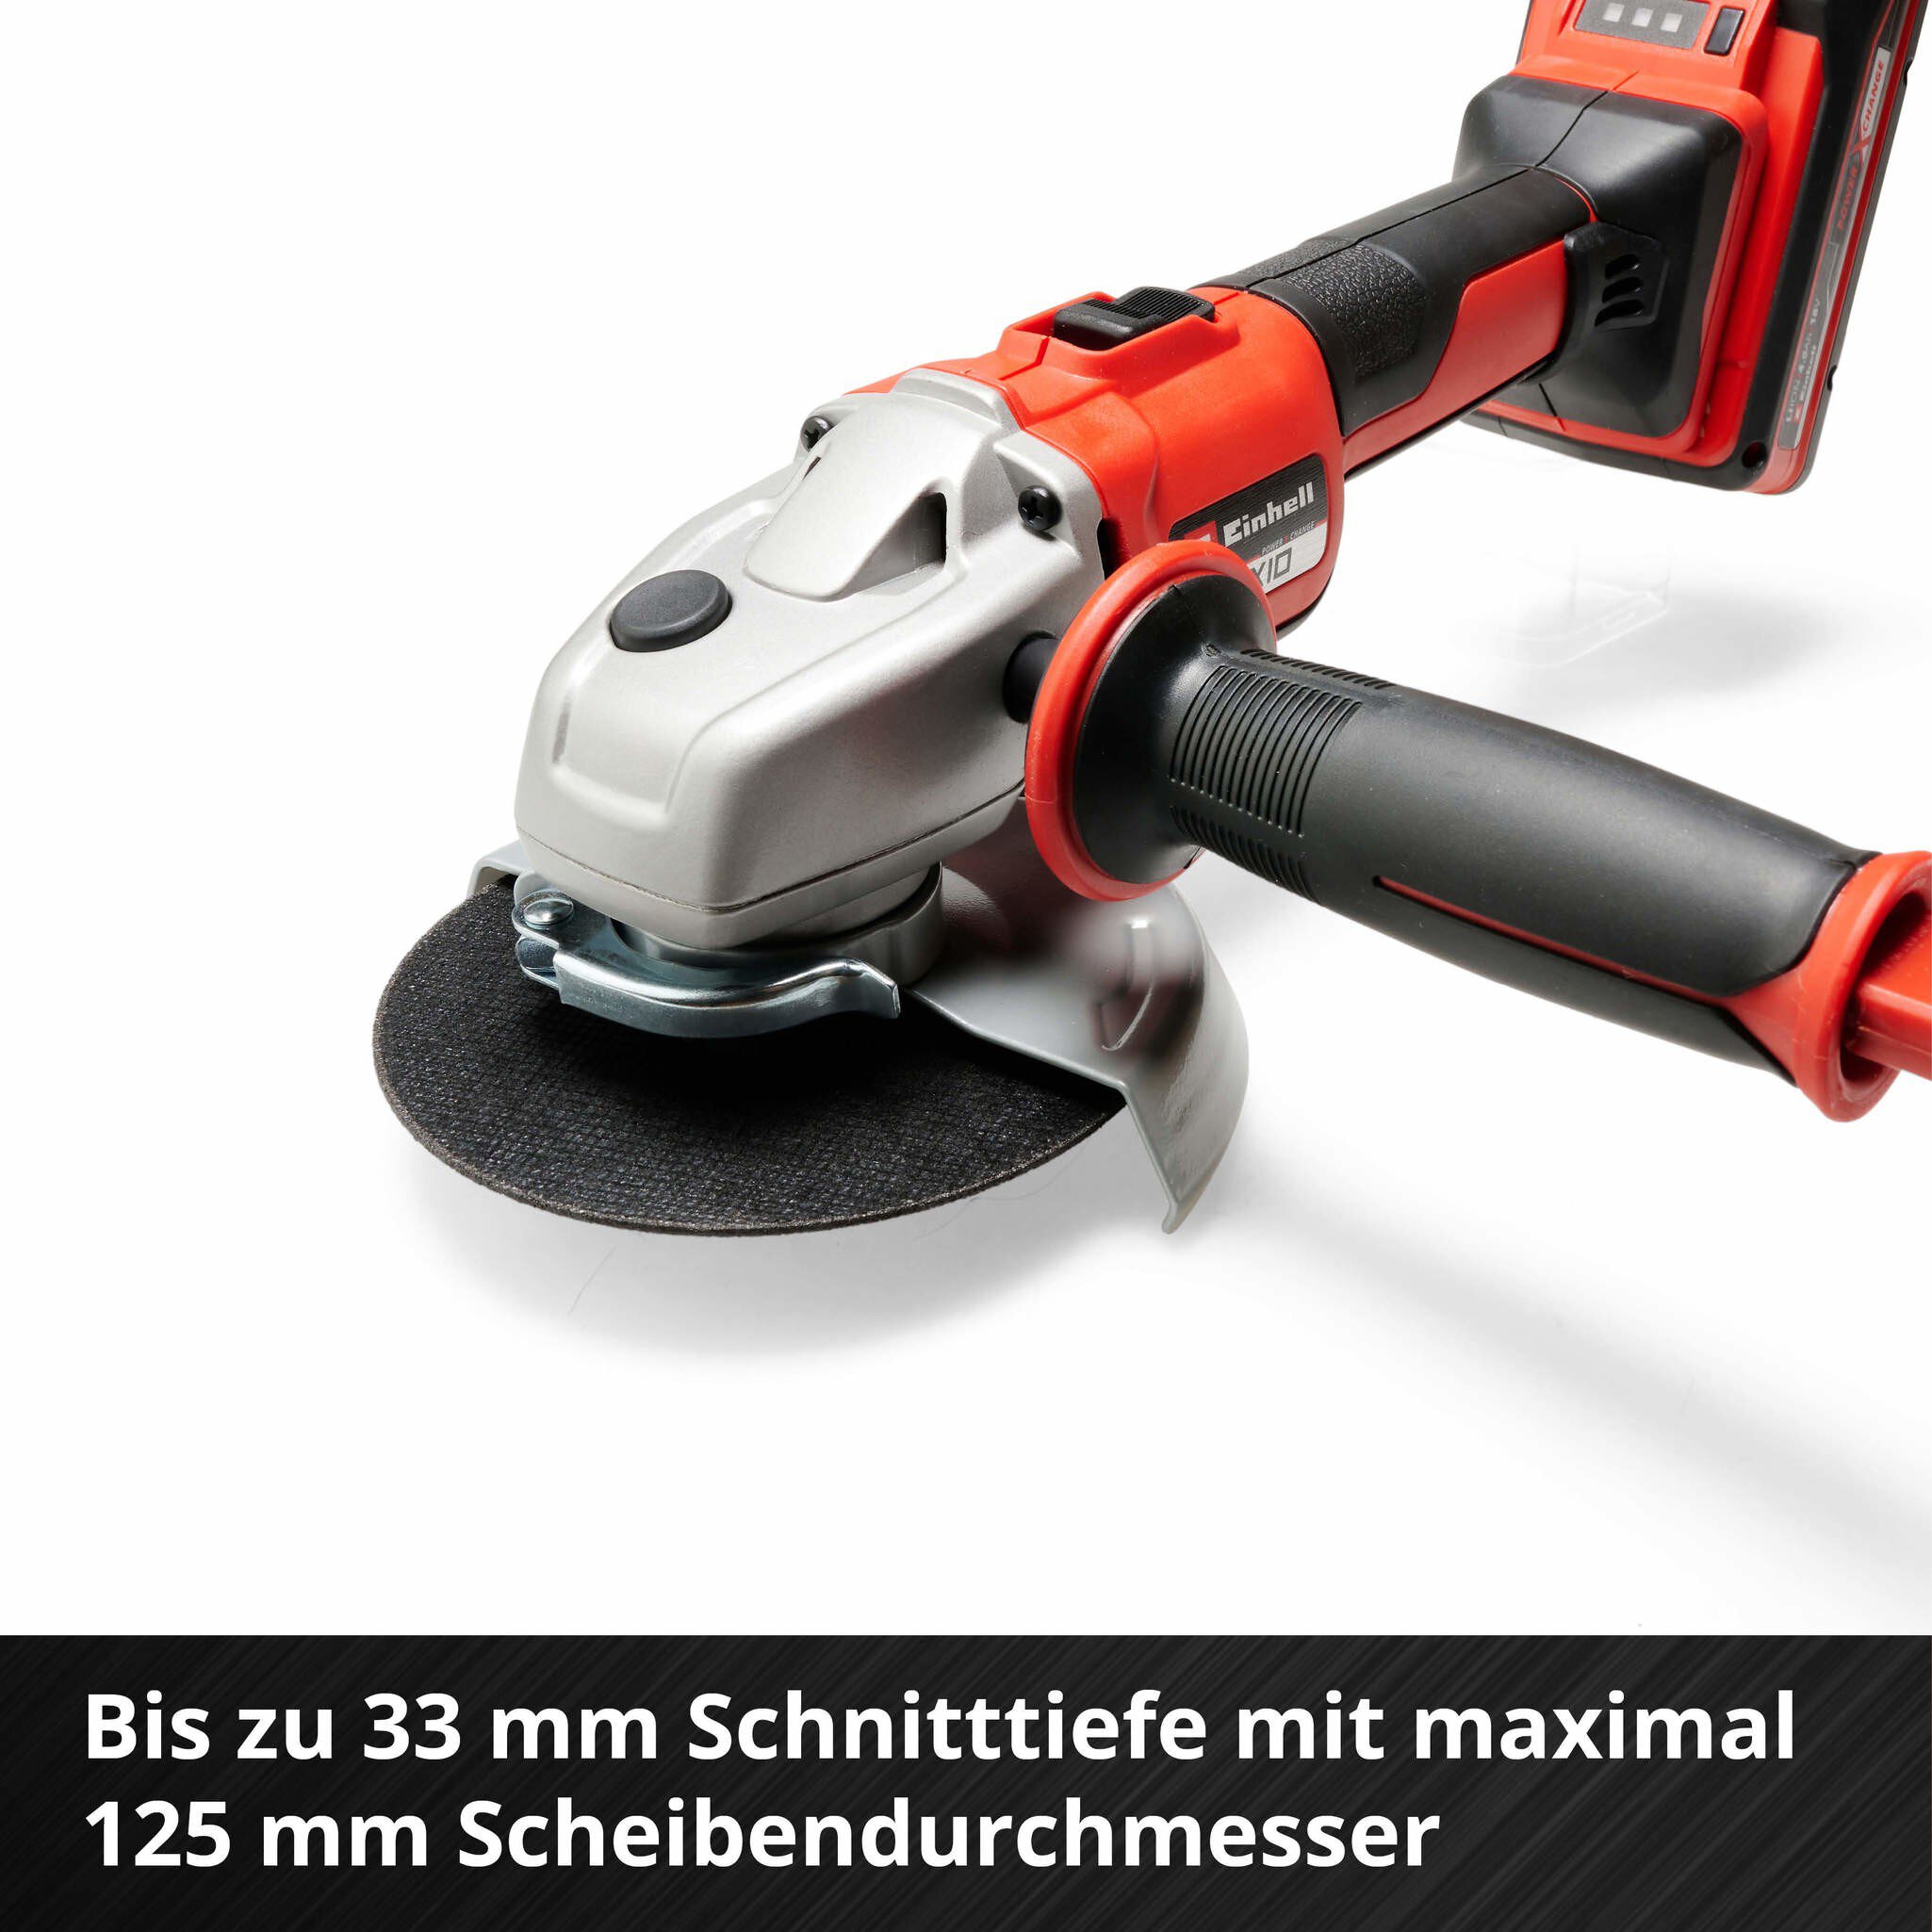 einhell-professional-cordless-angle-grinder-4431140-detail_image-003